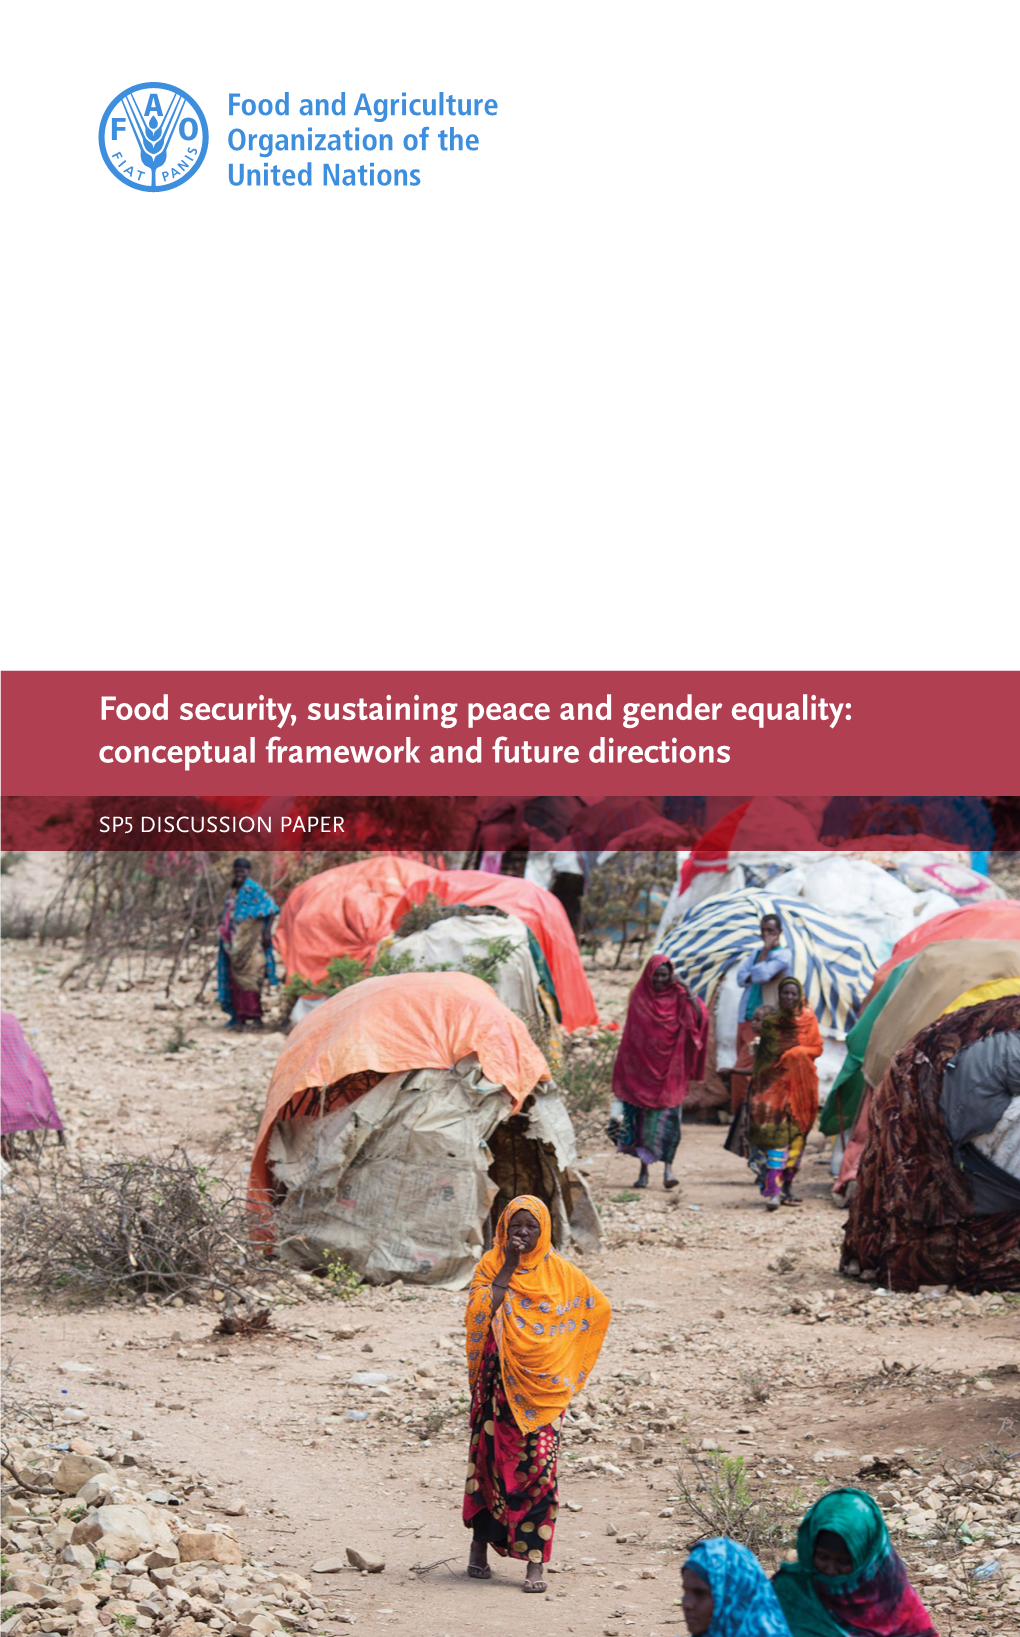 Food Security, Sustaining Peace and Gender Equality: Conceptual Framework and Future Directions